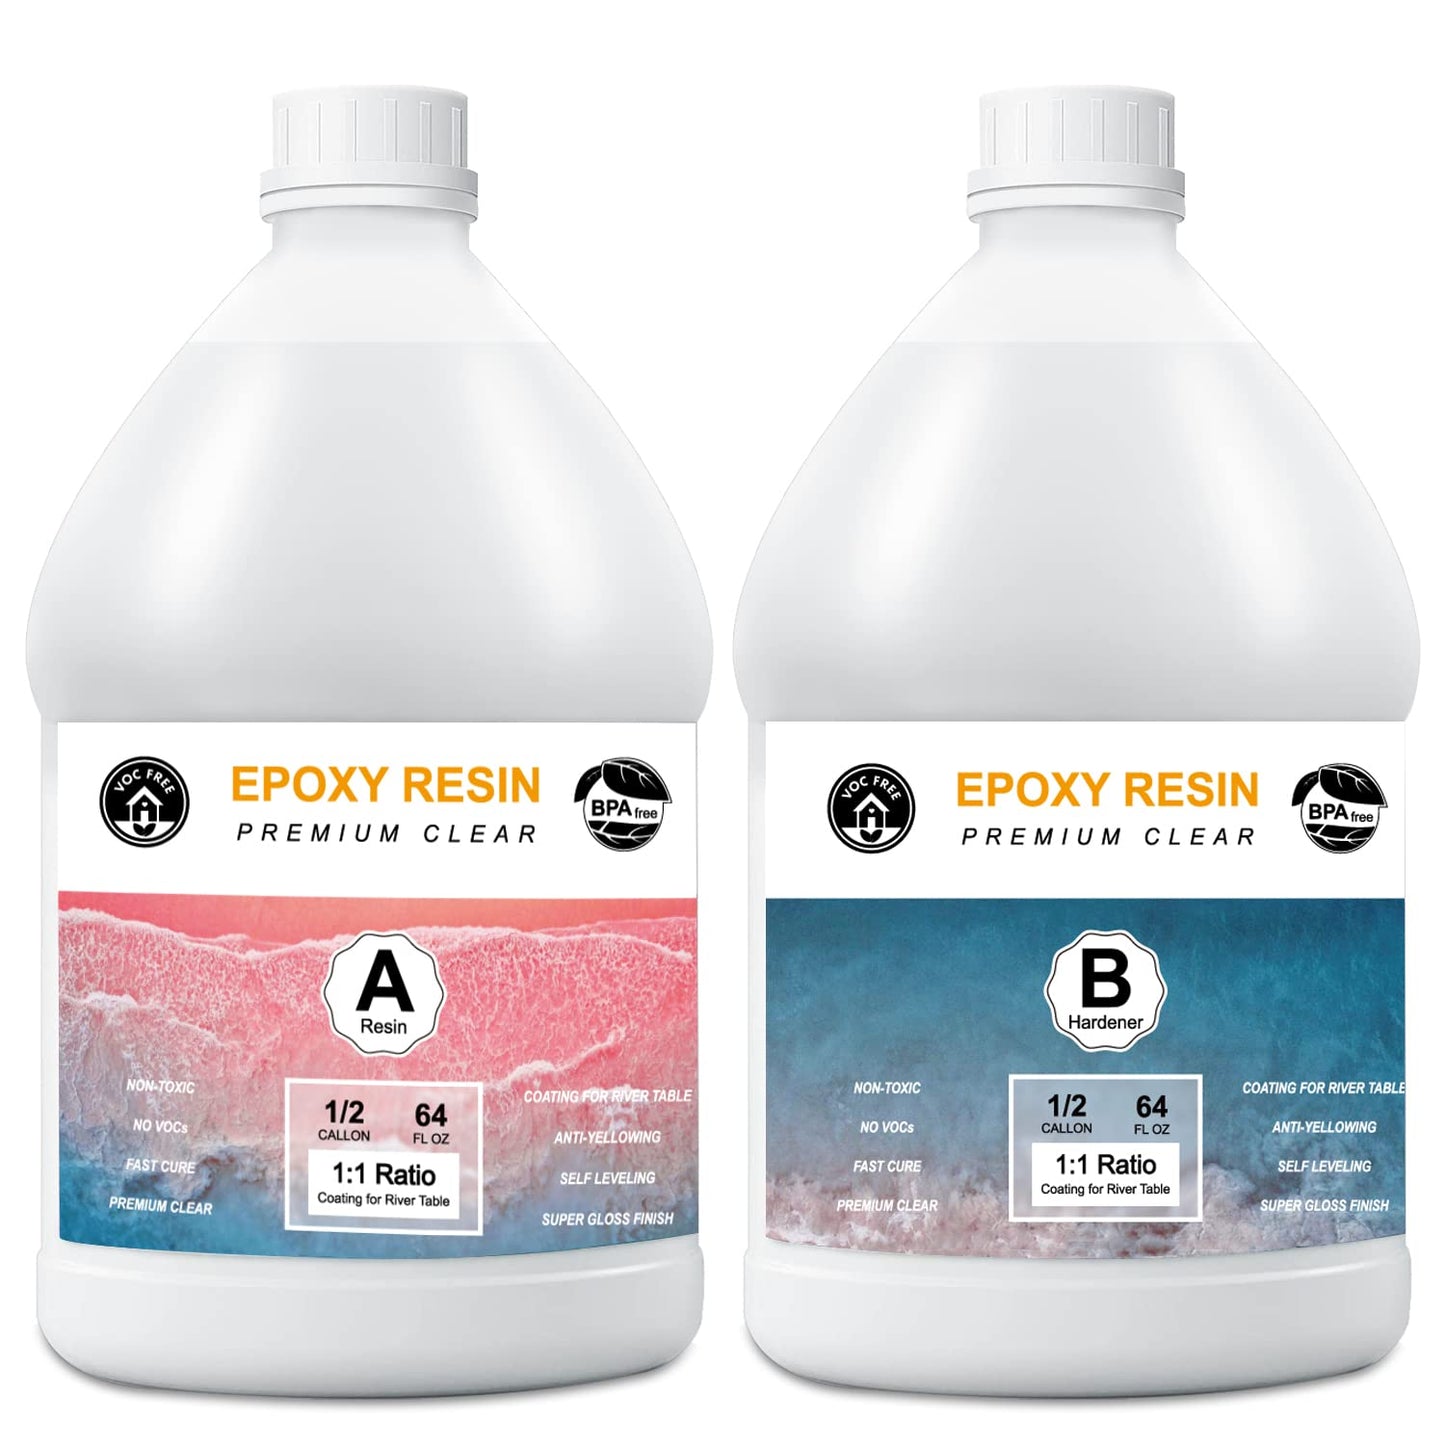 Clear Epoxy Resin for Coating Bar Tops, or Resin Casting (1 Gallon)